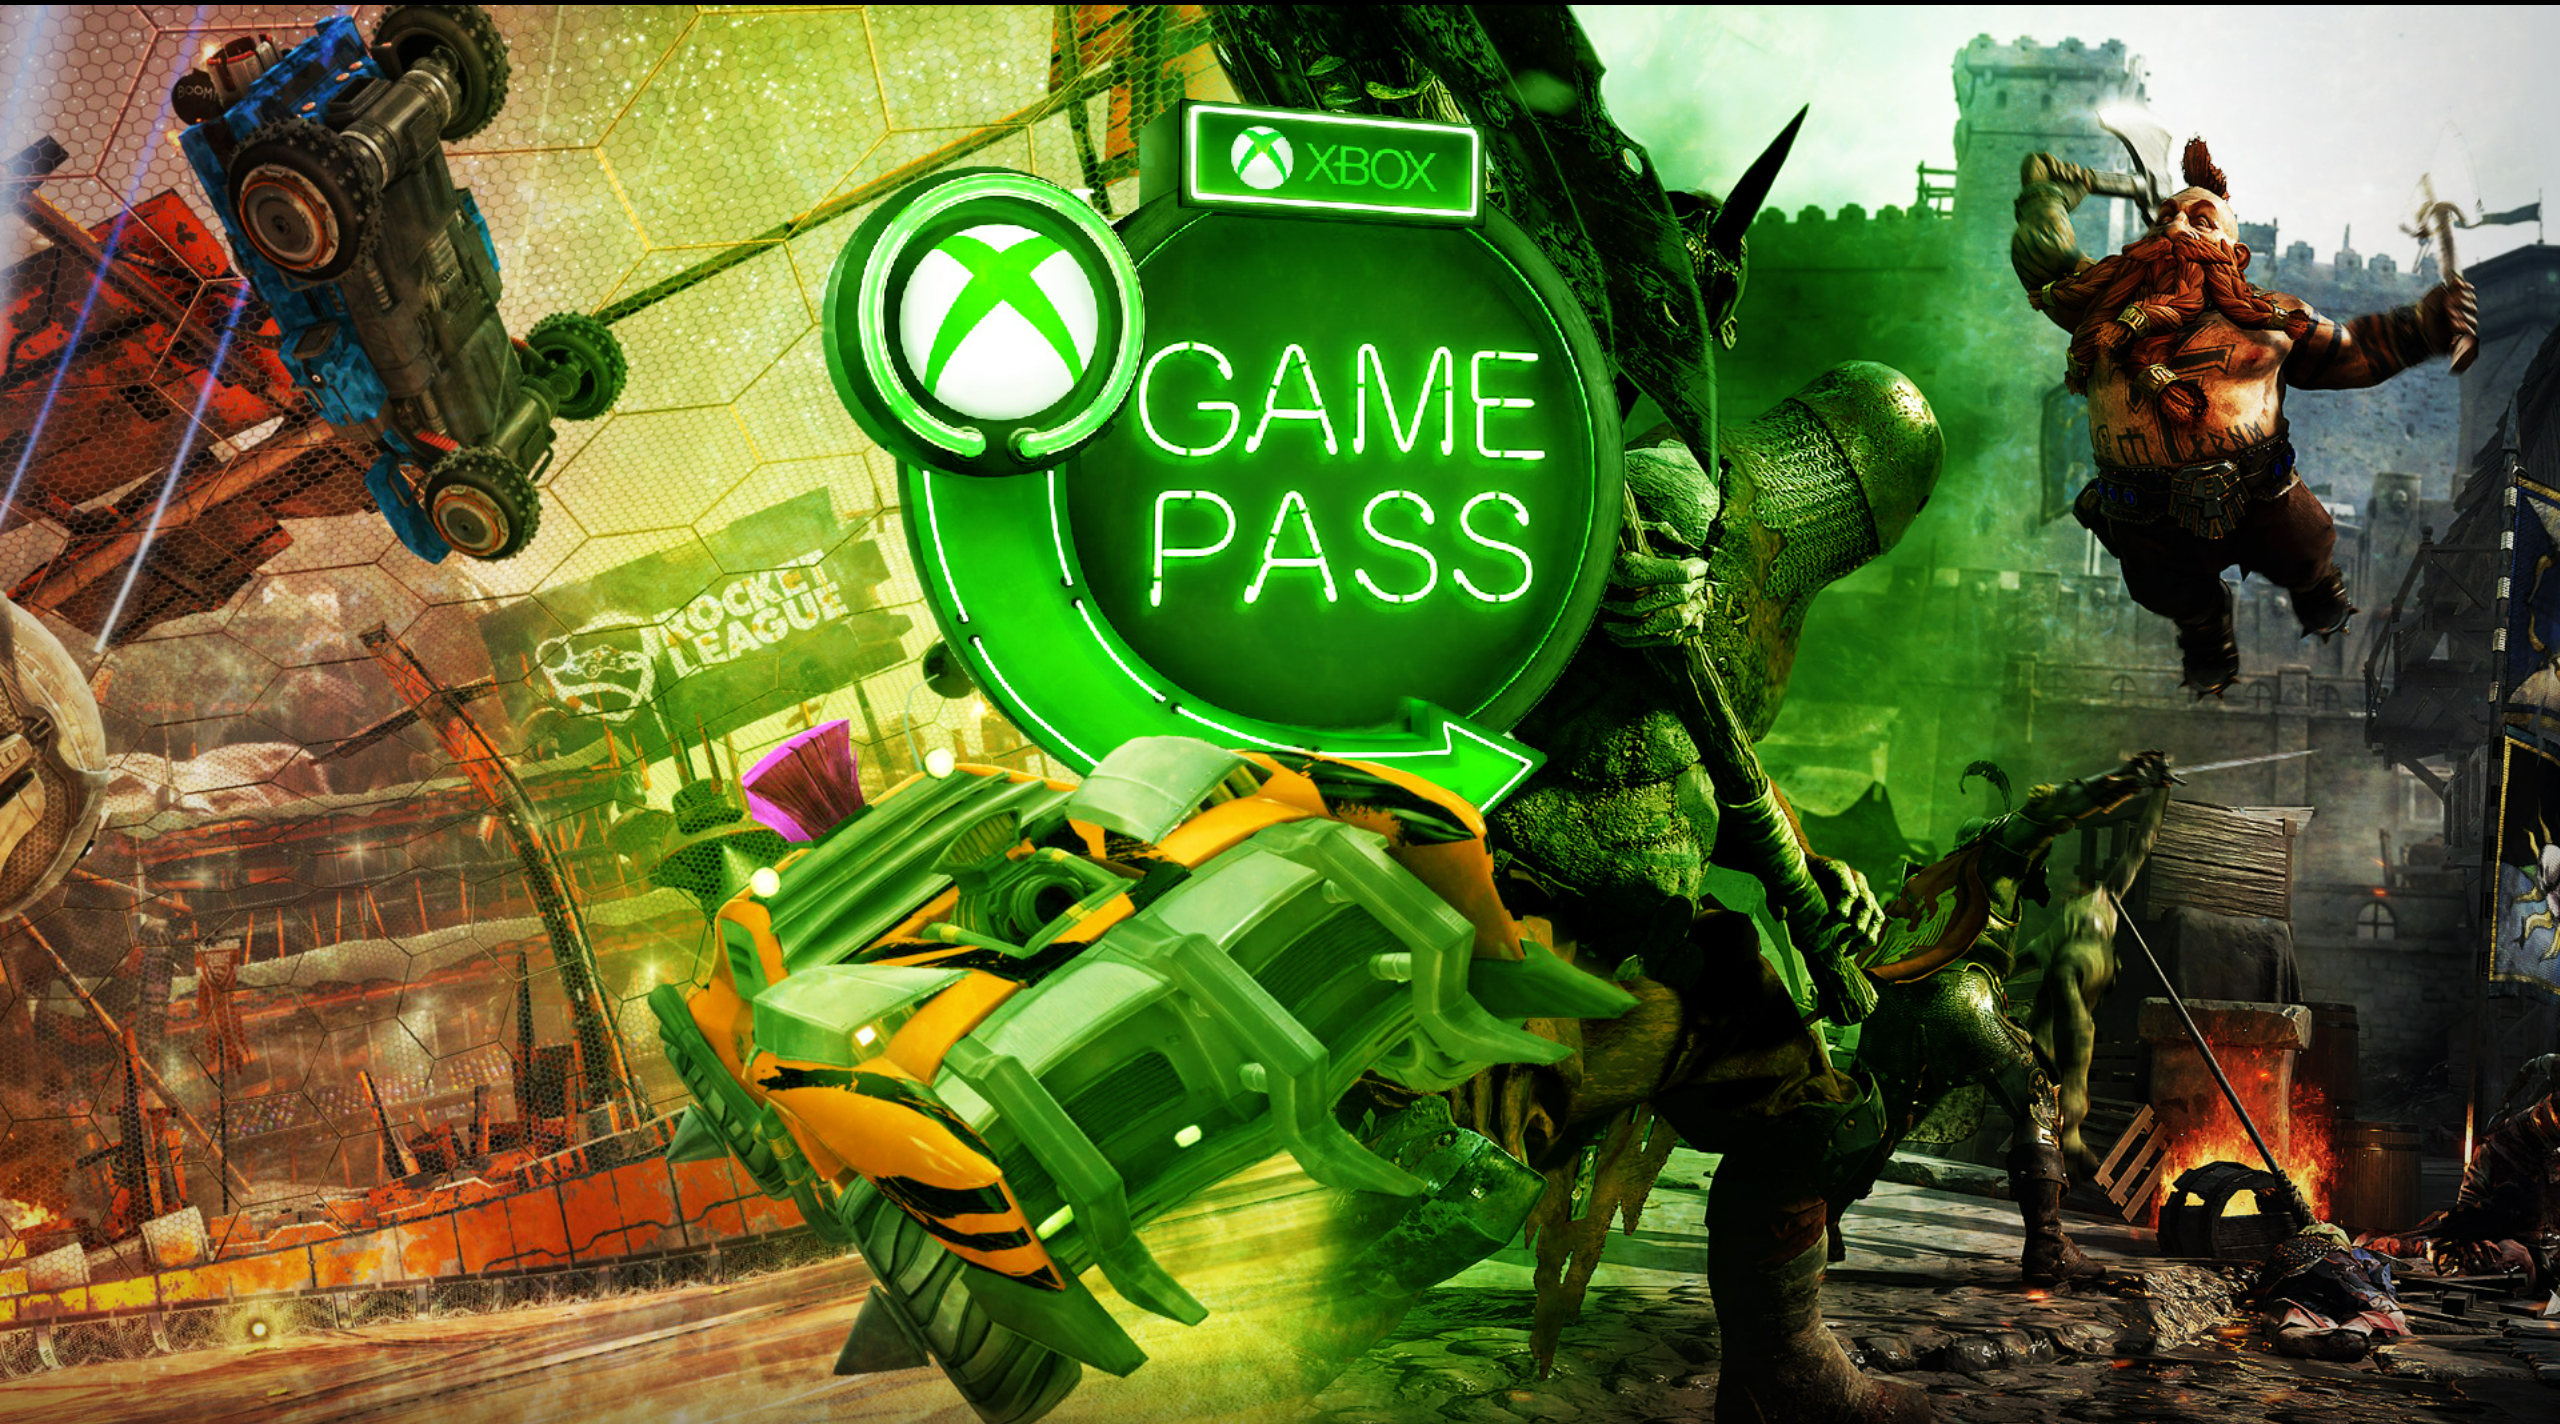 Game pass ultimate pc игры. Xbox Ultimate Pass игры. Xbox game Pass Ultimate. Подписка Xbox Ultimate. Подписка ультимейт для Xbox.